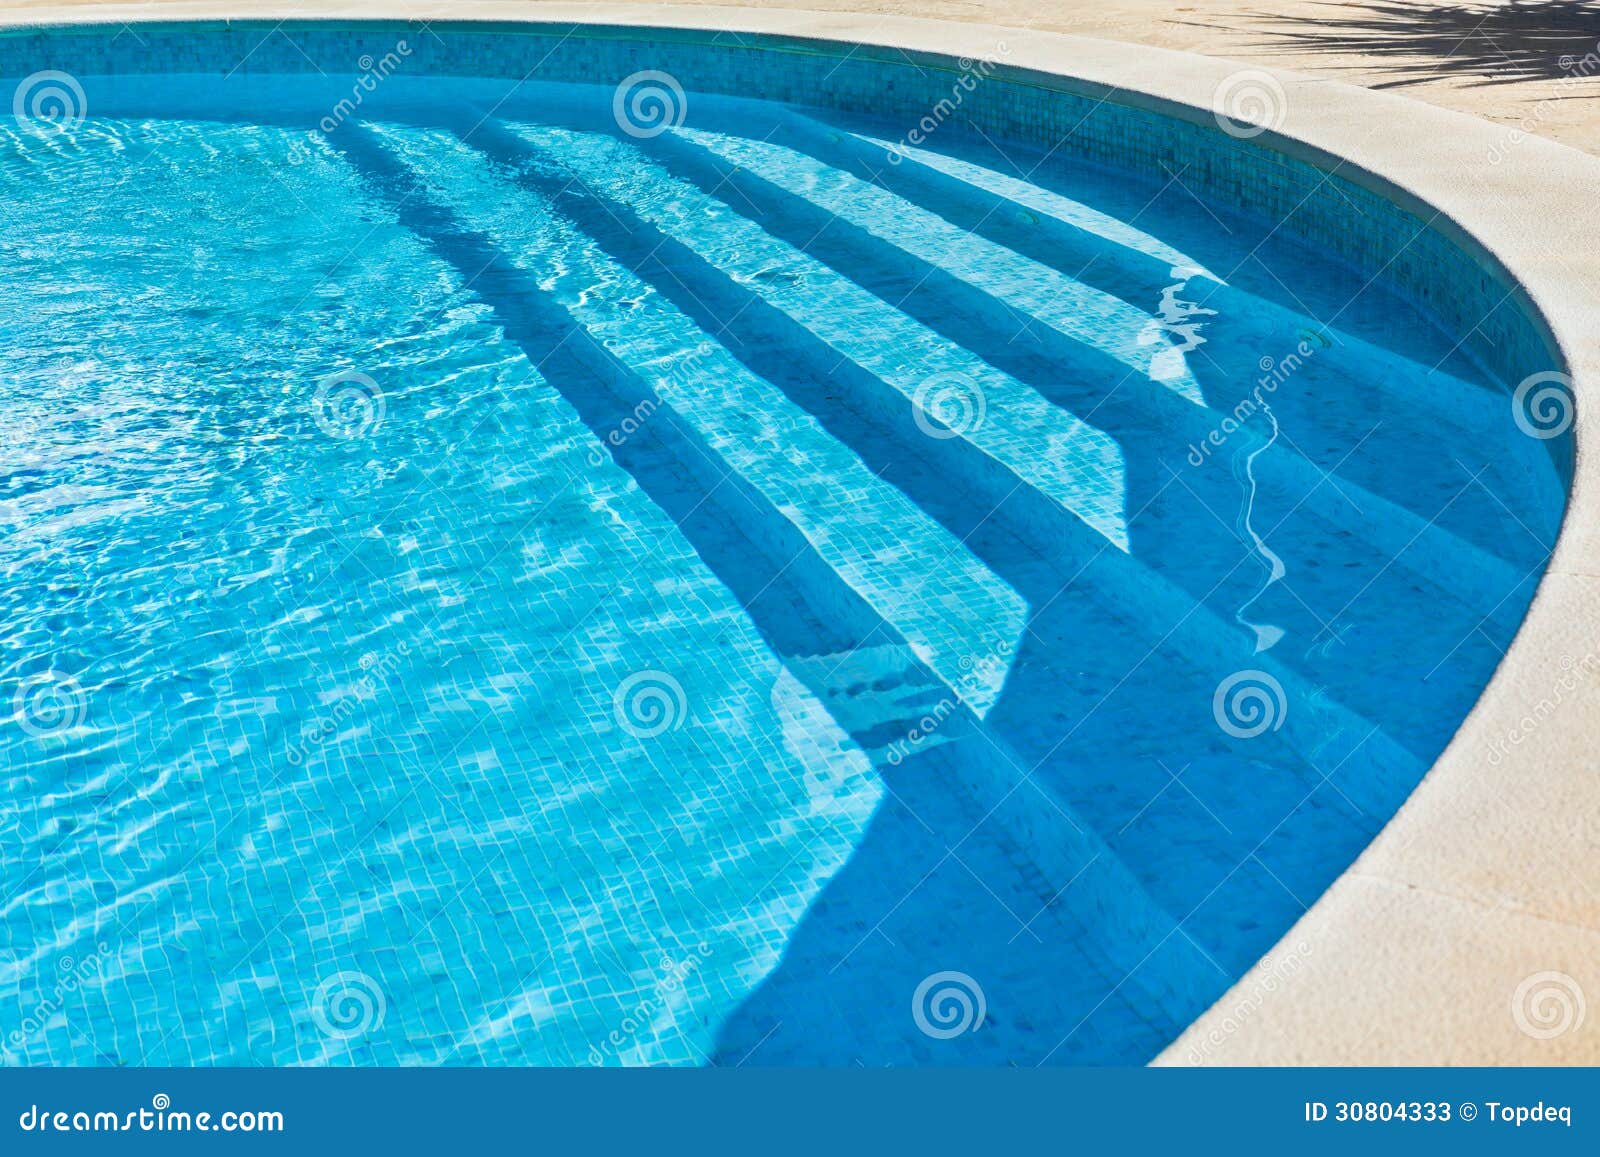 Outdoor Swimming pool with staircase. Horizontal shot.